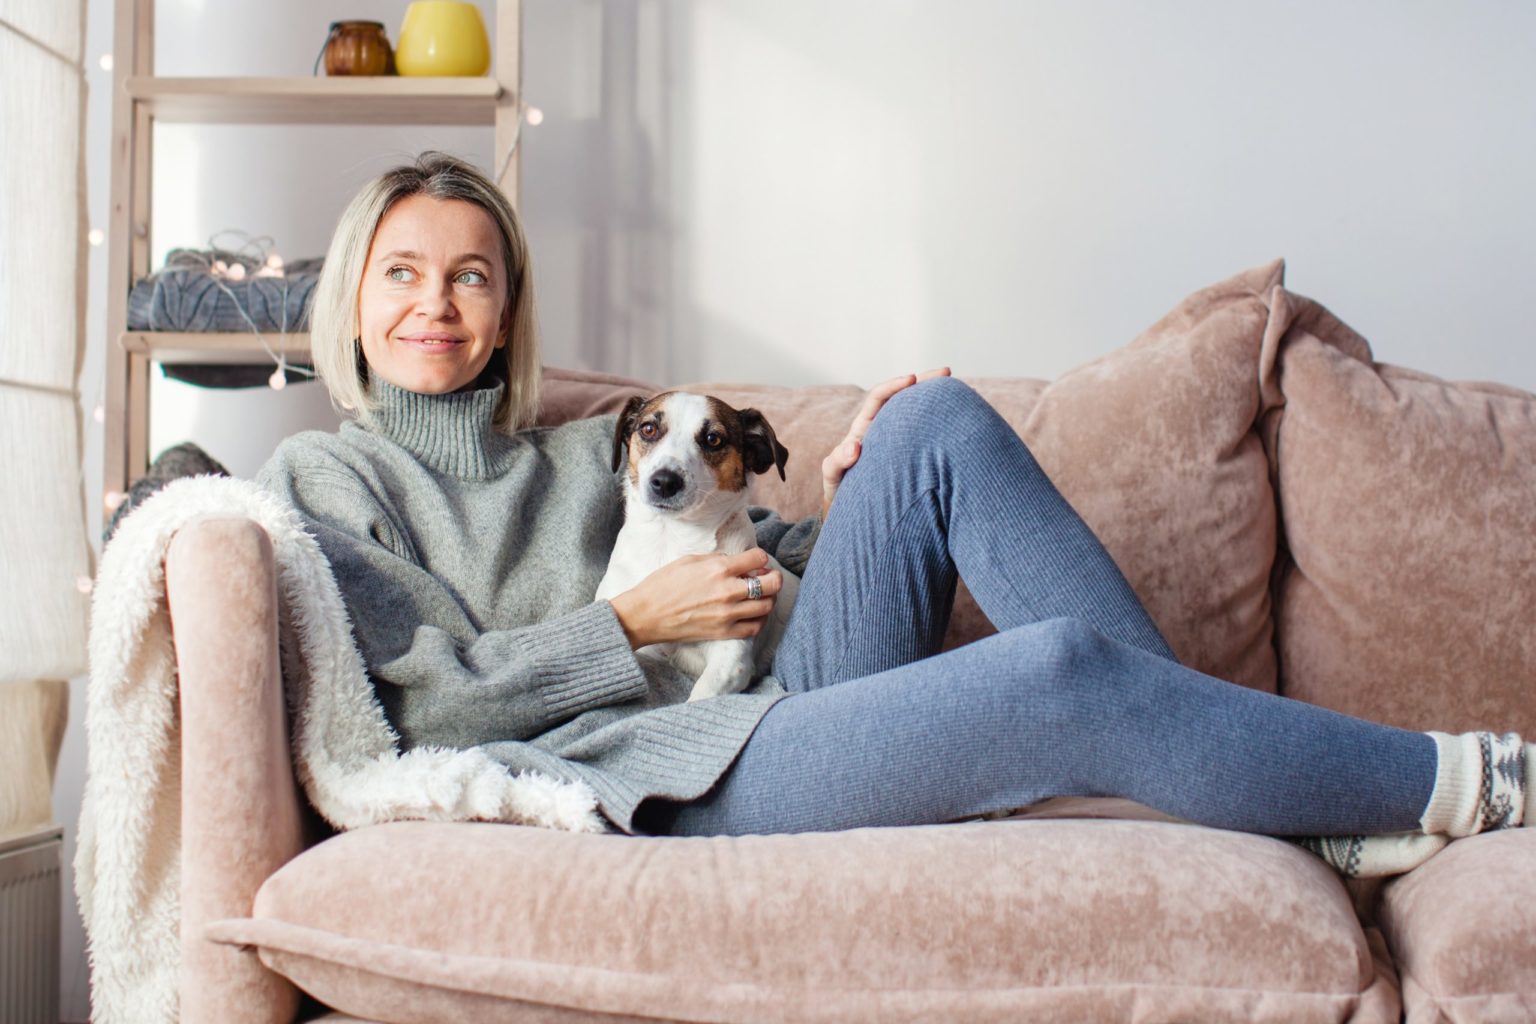 a person sitting on a couch holding a dog